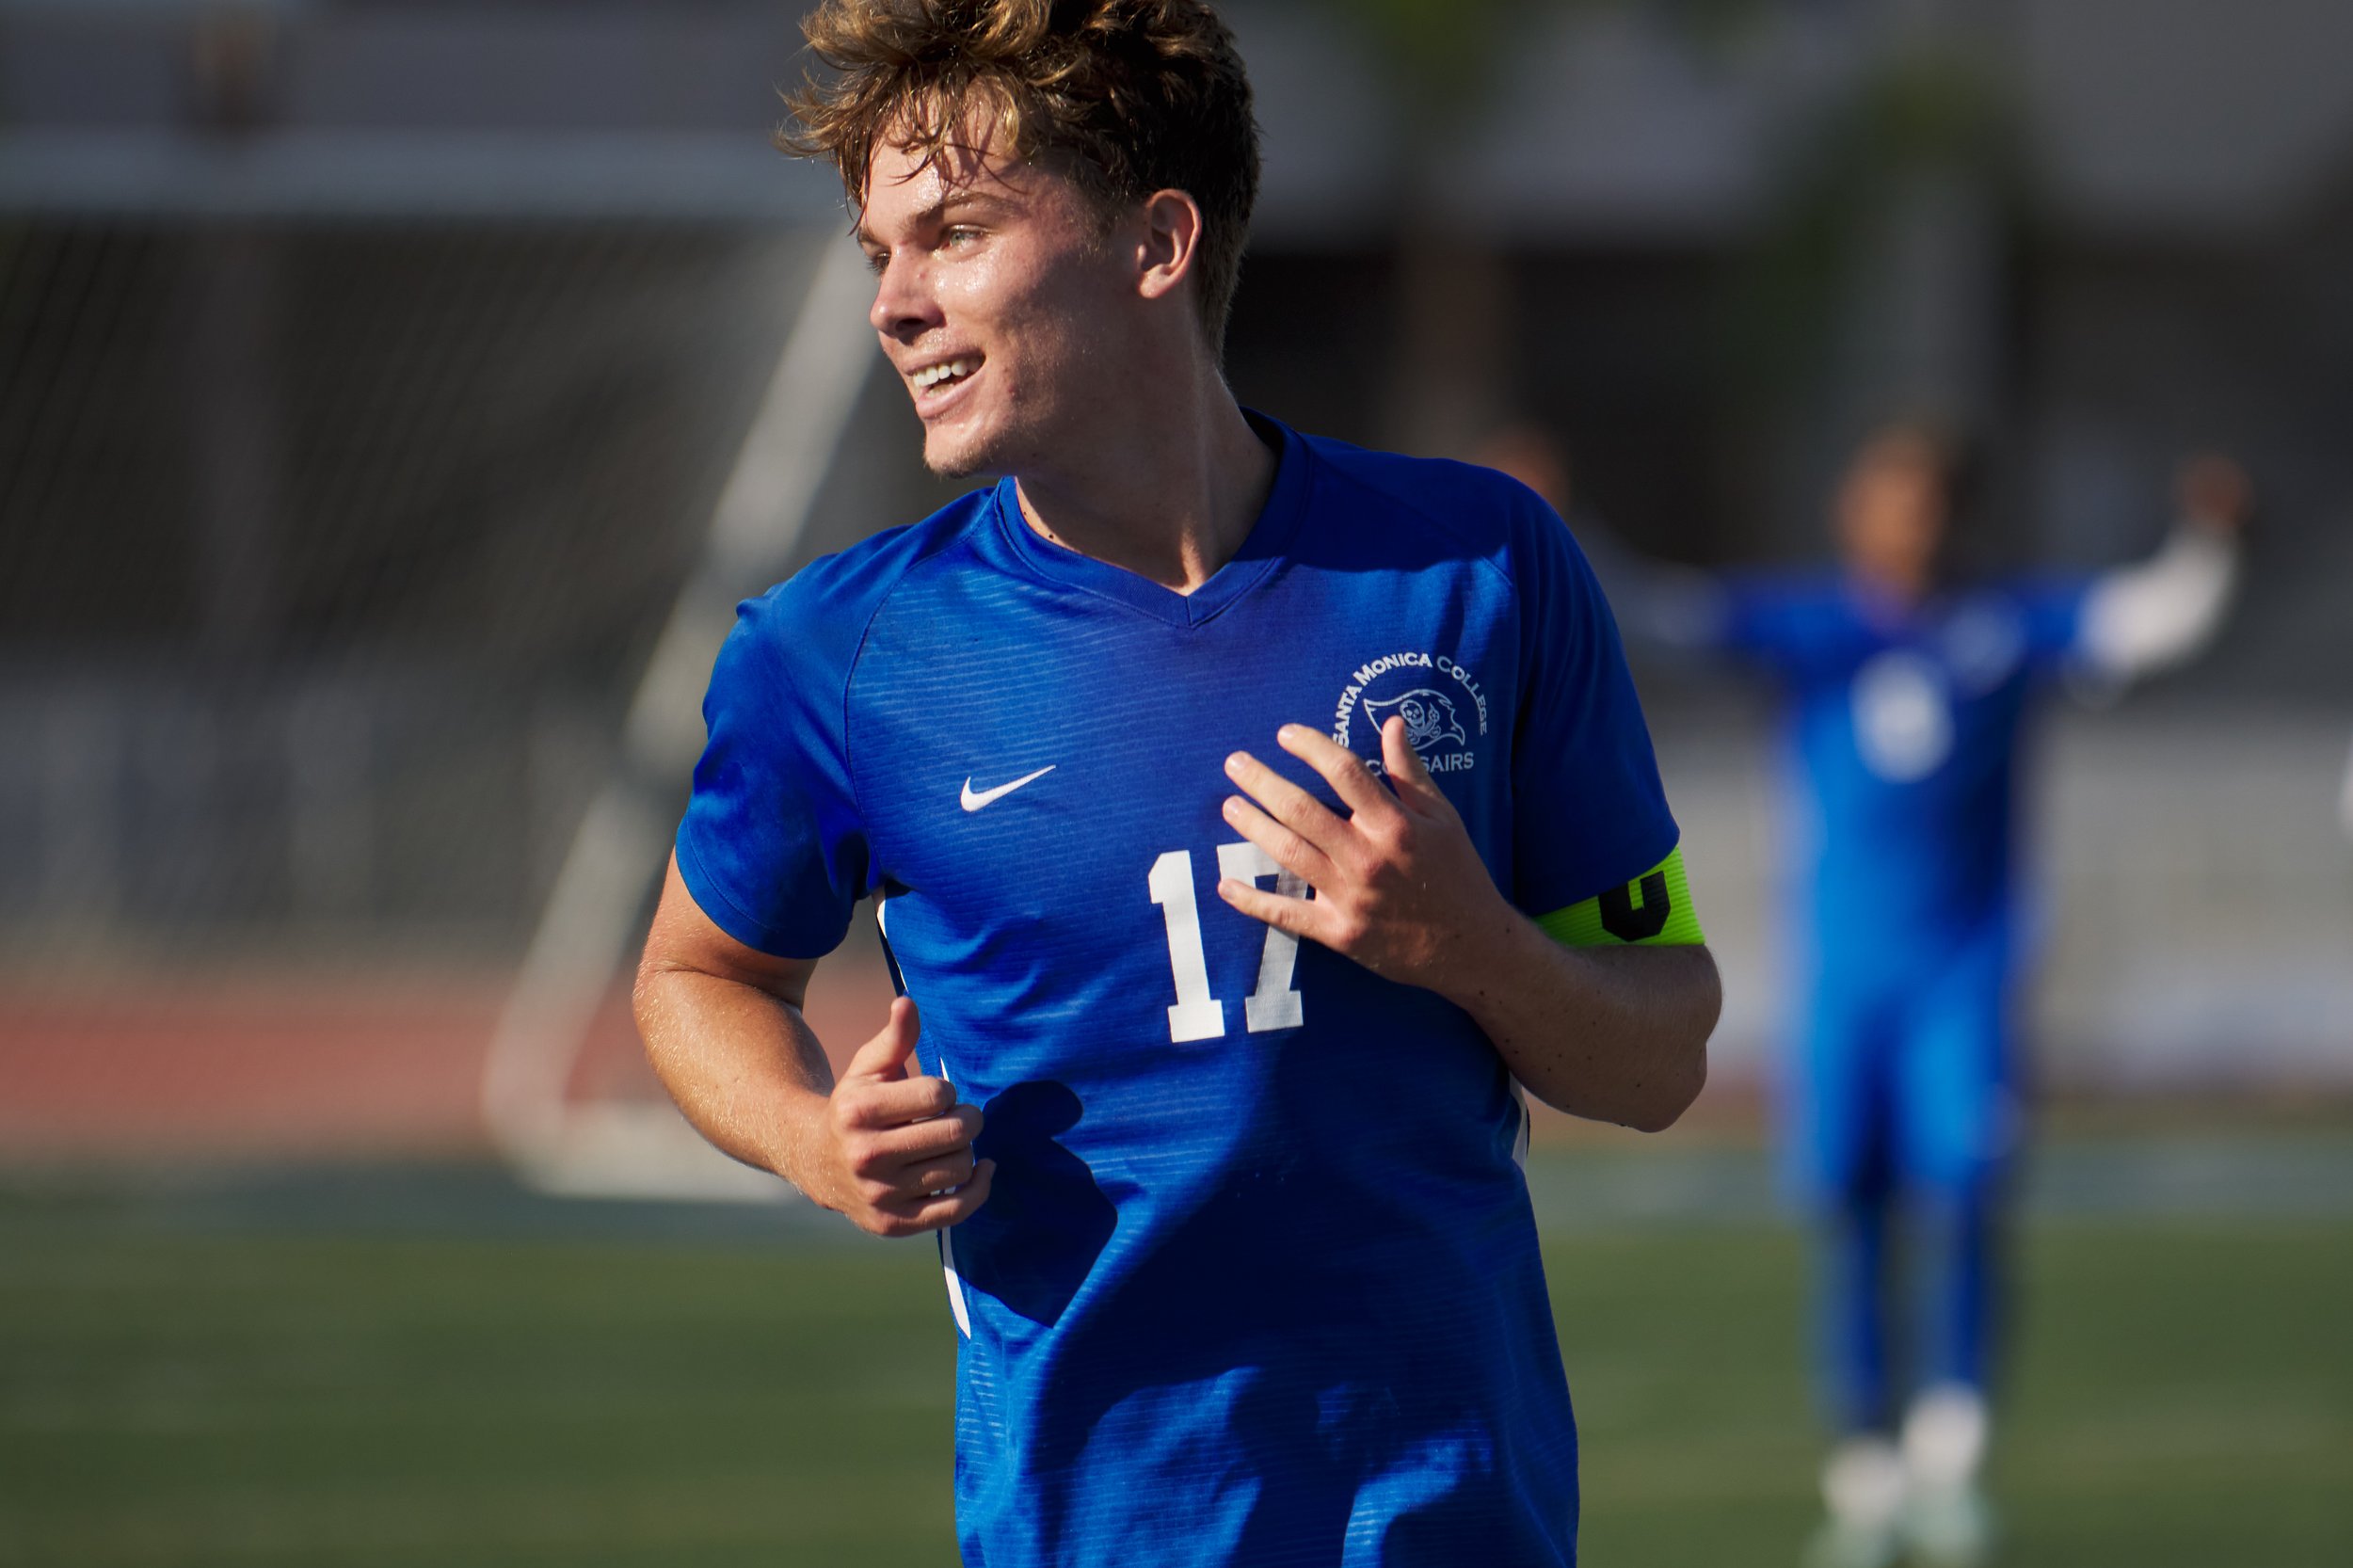  Taj Winnard after his goal for the Santa Monica College Corsairs during the men's soccer match against the Glendale Community College Vaqueros on Tuesday, Sept. 27, 2022, at Corsair Field in Santa Monica, Calif. The Corsairs won 3-0. (Nicholas McCal